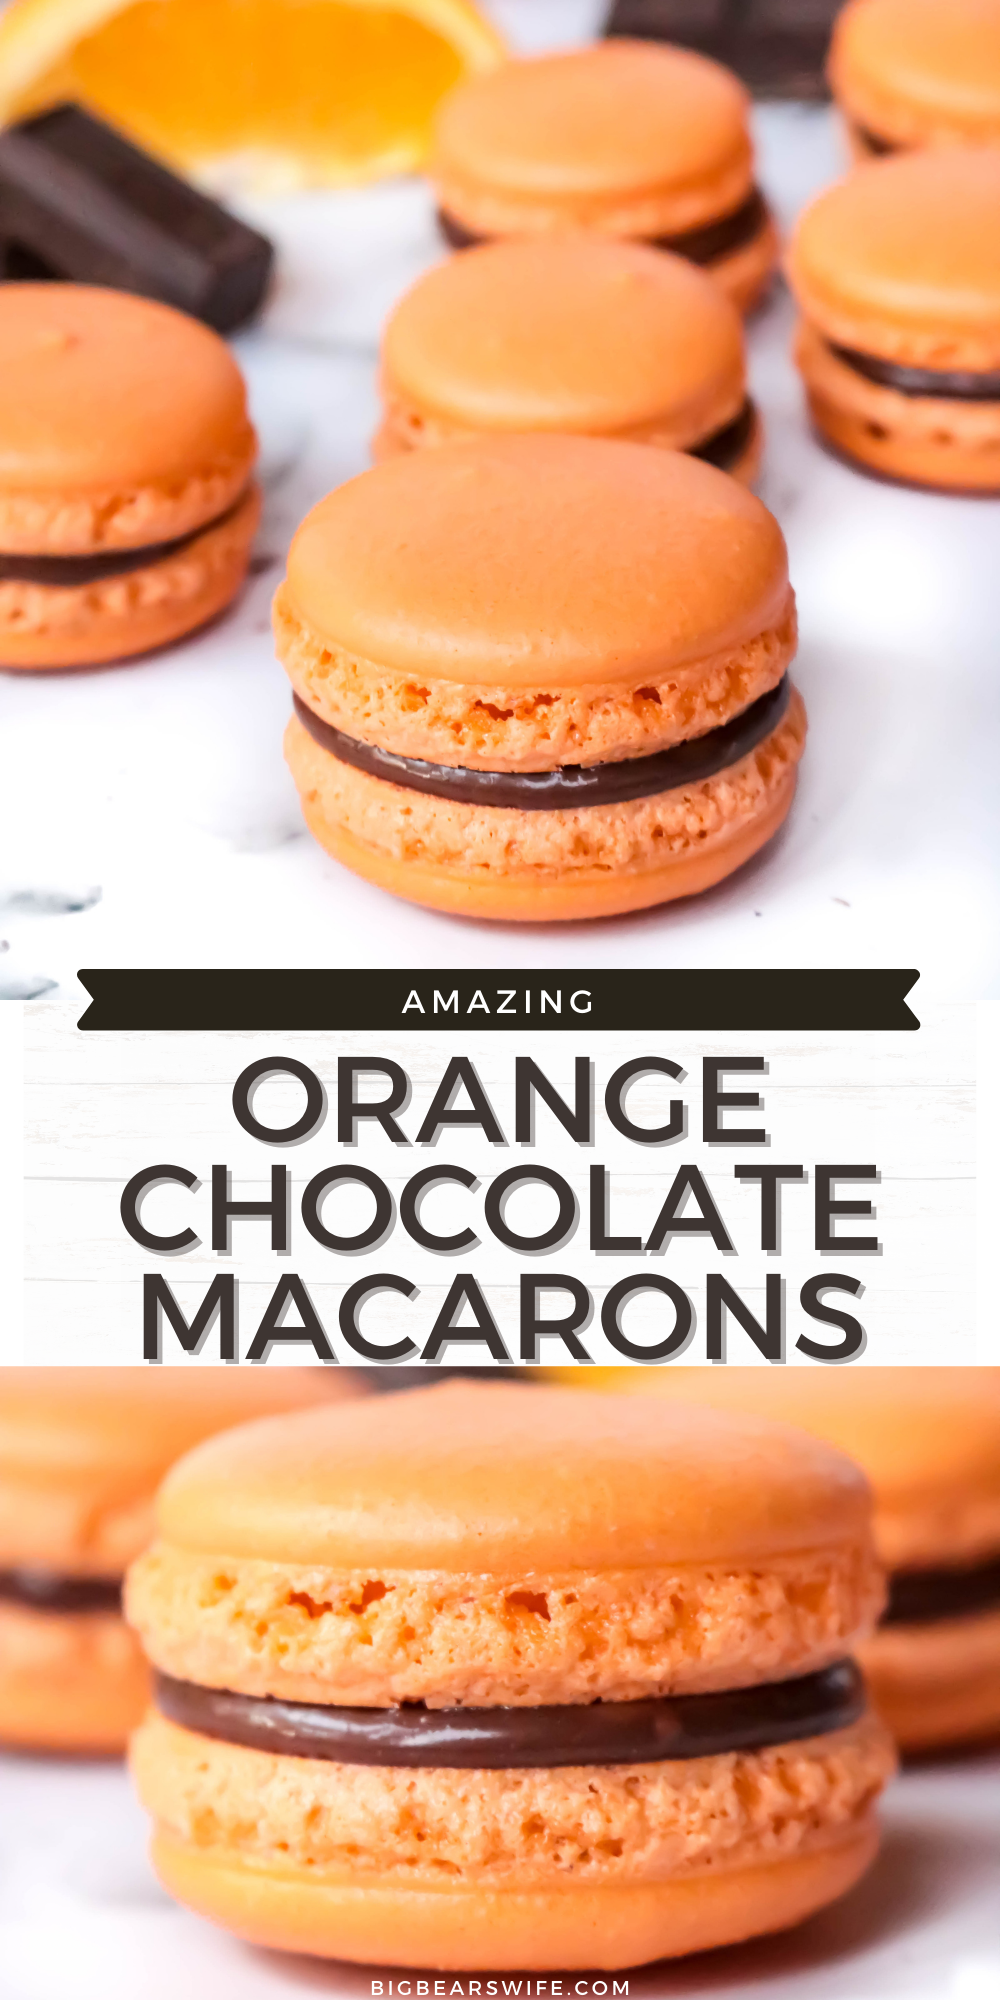 Dive into a sweet combination of orange and chocolate with these fantastically festive Orange Chocolate Macarons. These macarons have an orange flavored shell and they are filled with a wonderful homemade chocolate ganache. via @bigbearswife